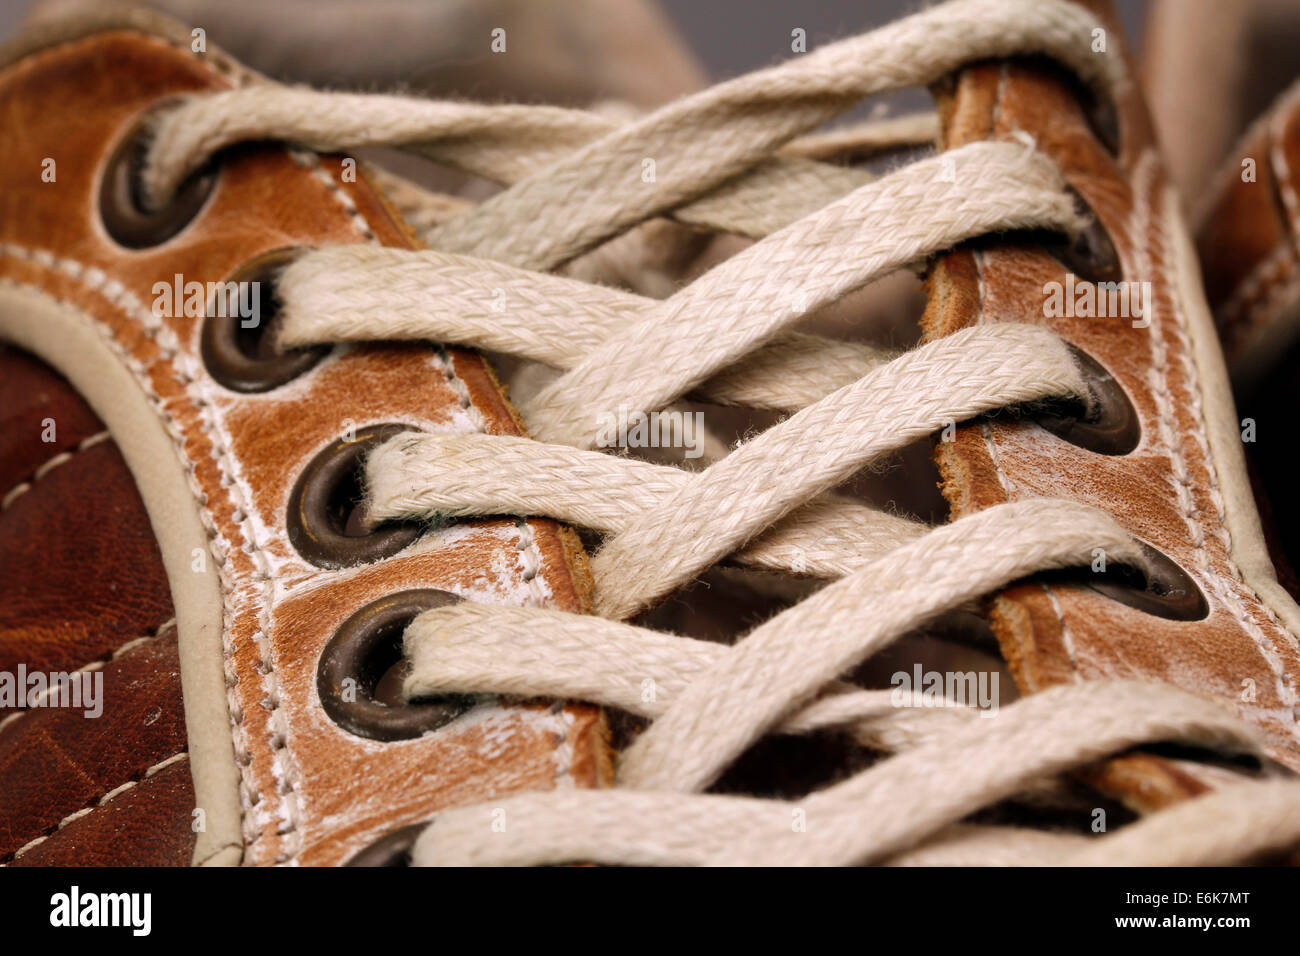 Laces of a leather shoe Stock Photo